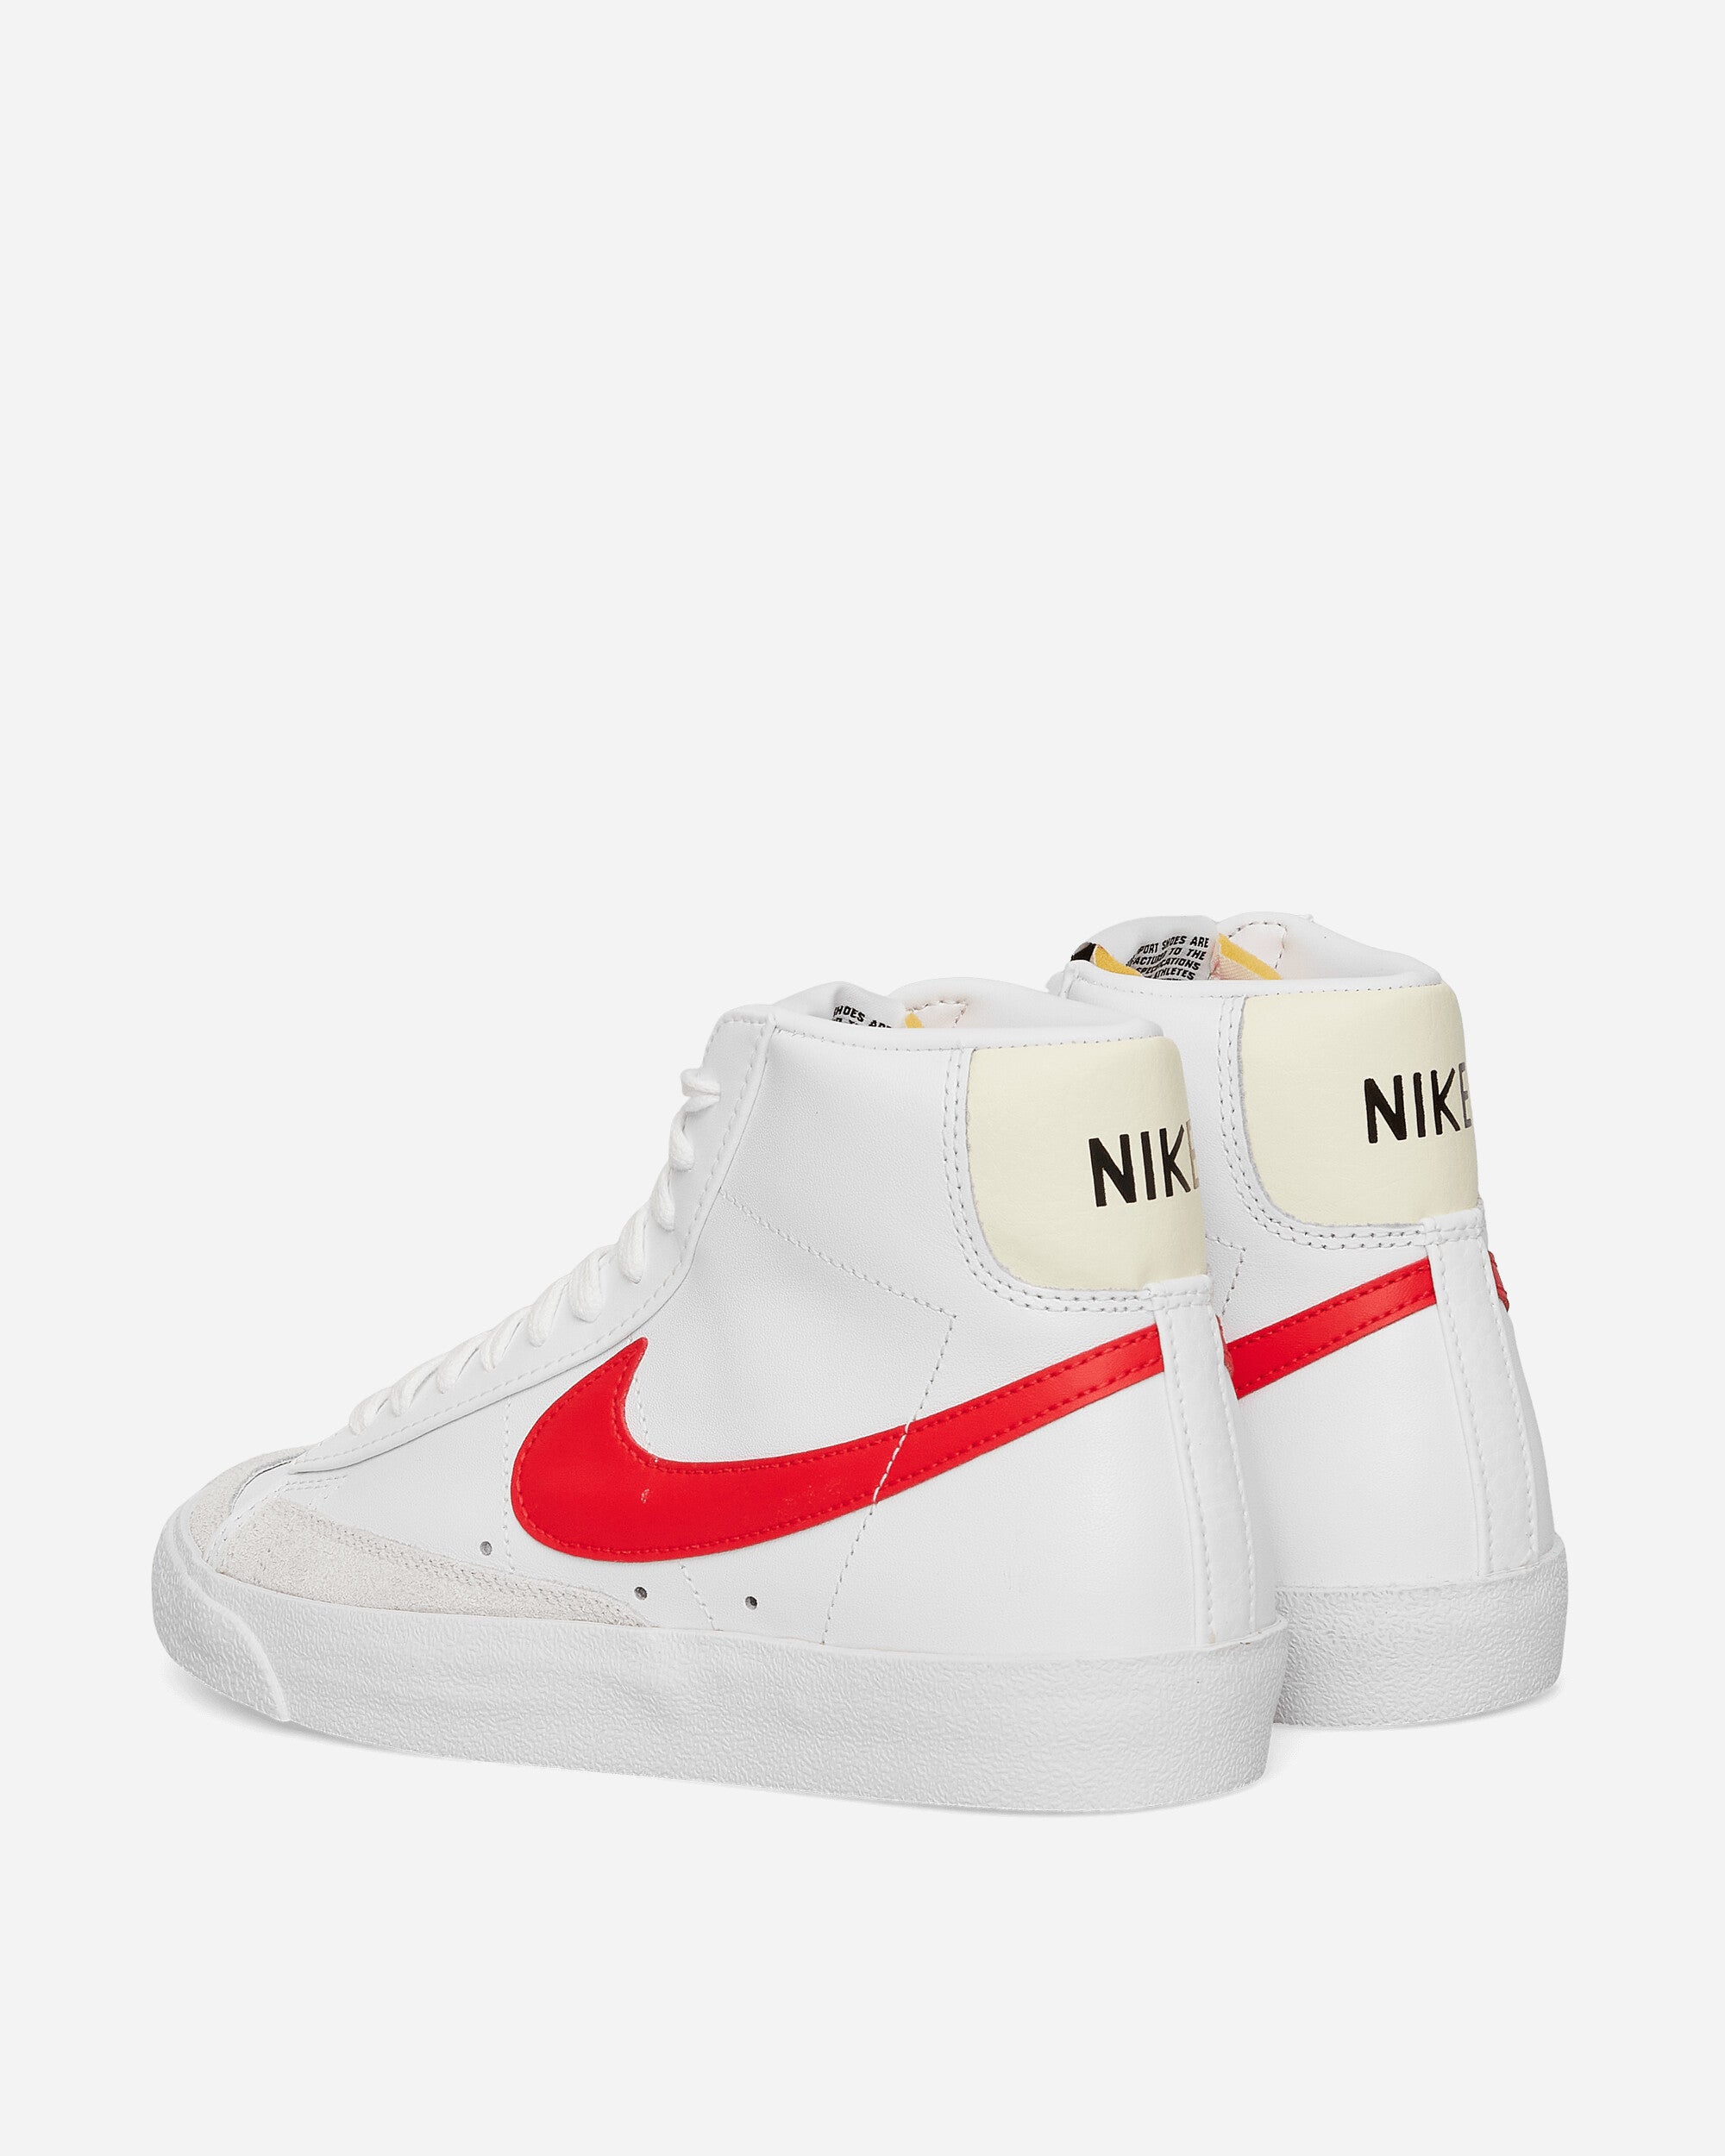 Nike Blazer Mid 77 Vntg White/Picante Red Boots Mid Boot BQ6806-122